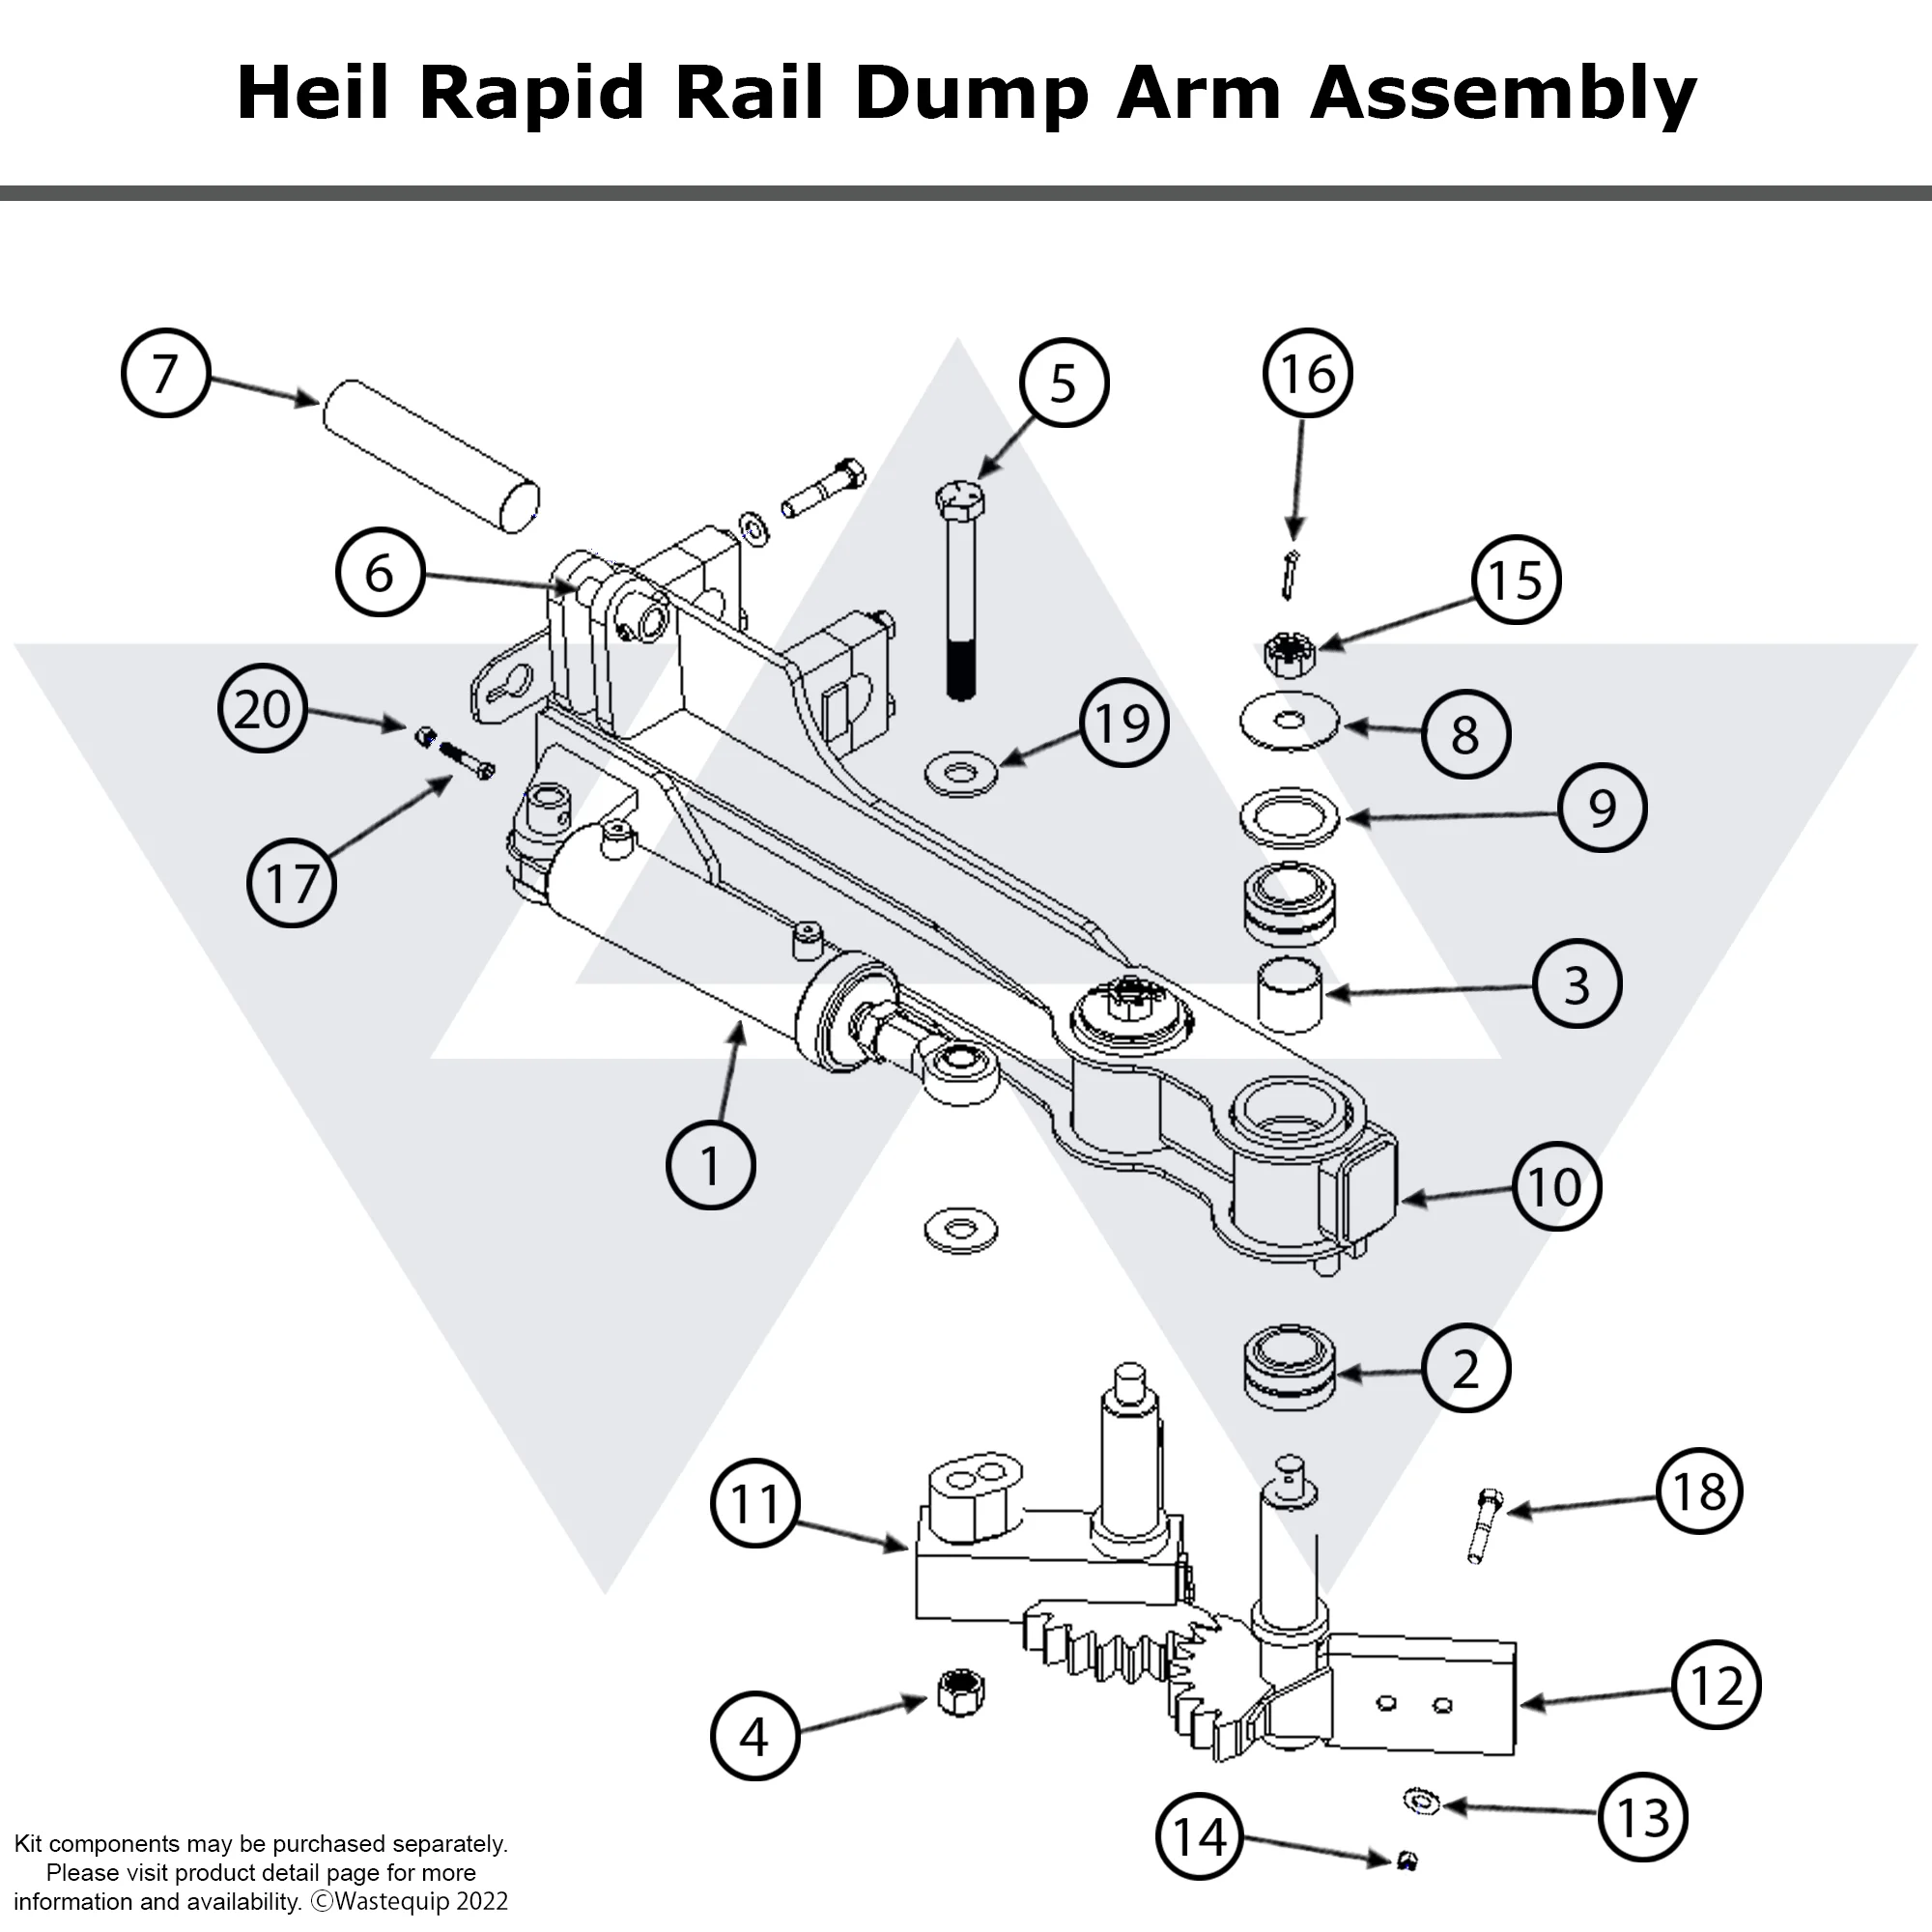 Wastebuilt® Replacement for Heil Arm,DP,Standard,Assembly, 093-2739, 093-2280-099